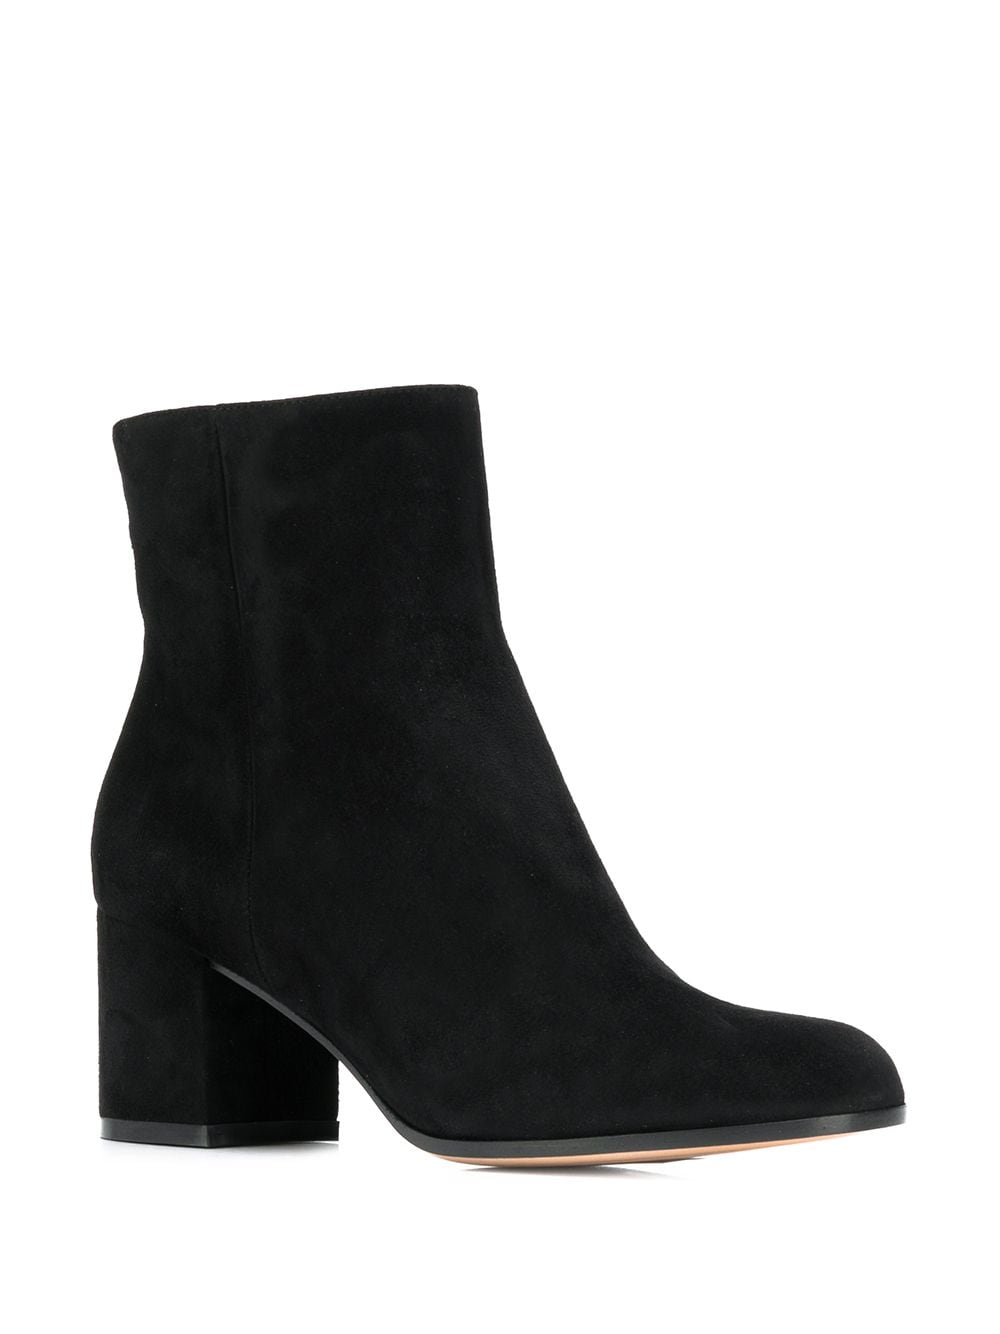 Image 2 of Gianvito Rossi heeled Margaux boots